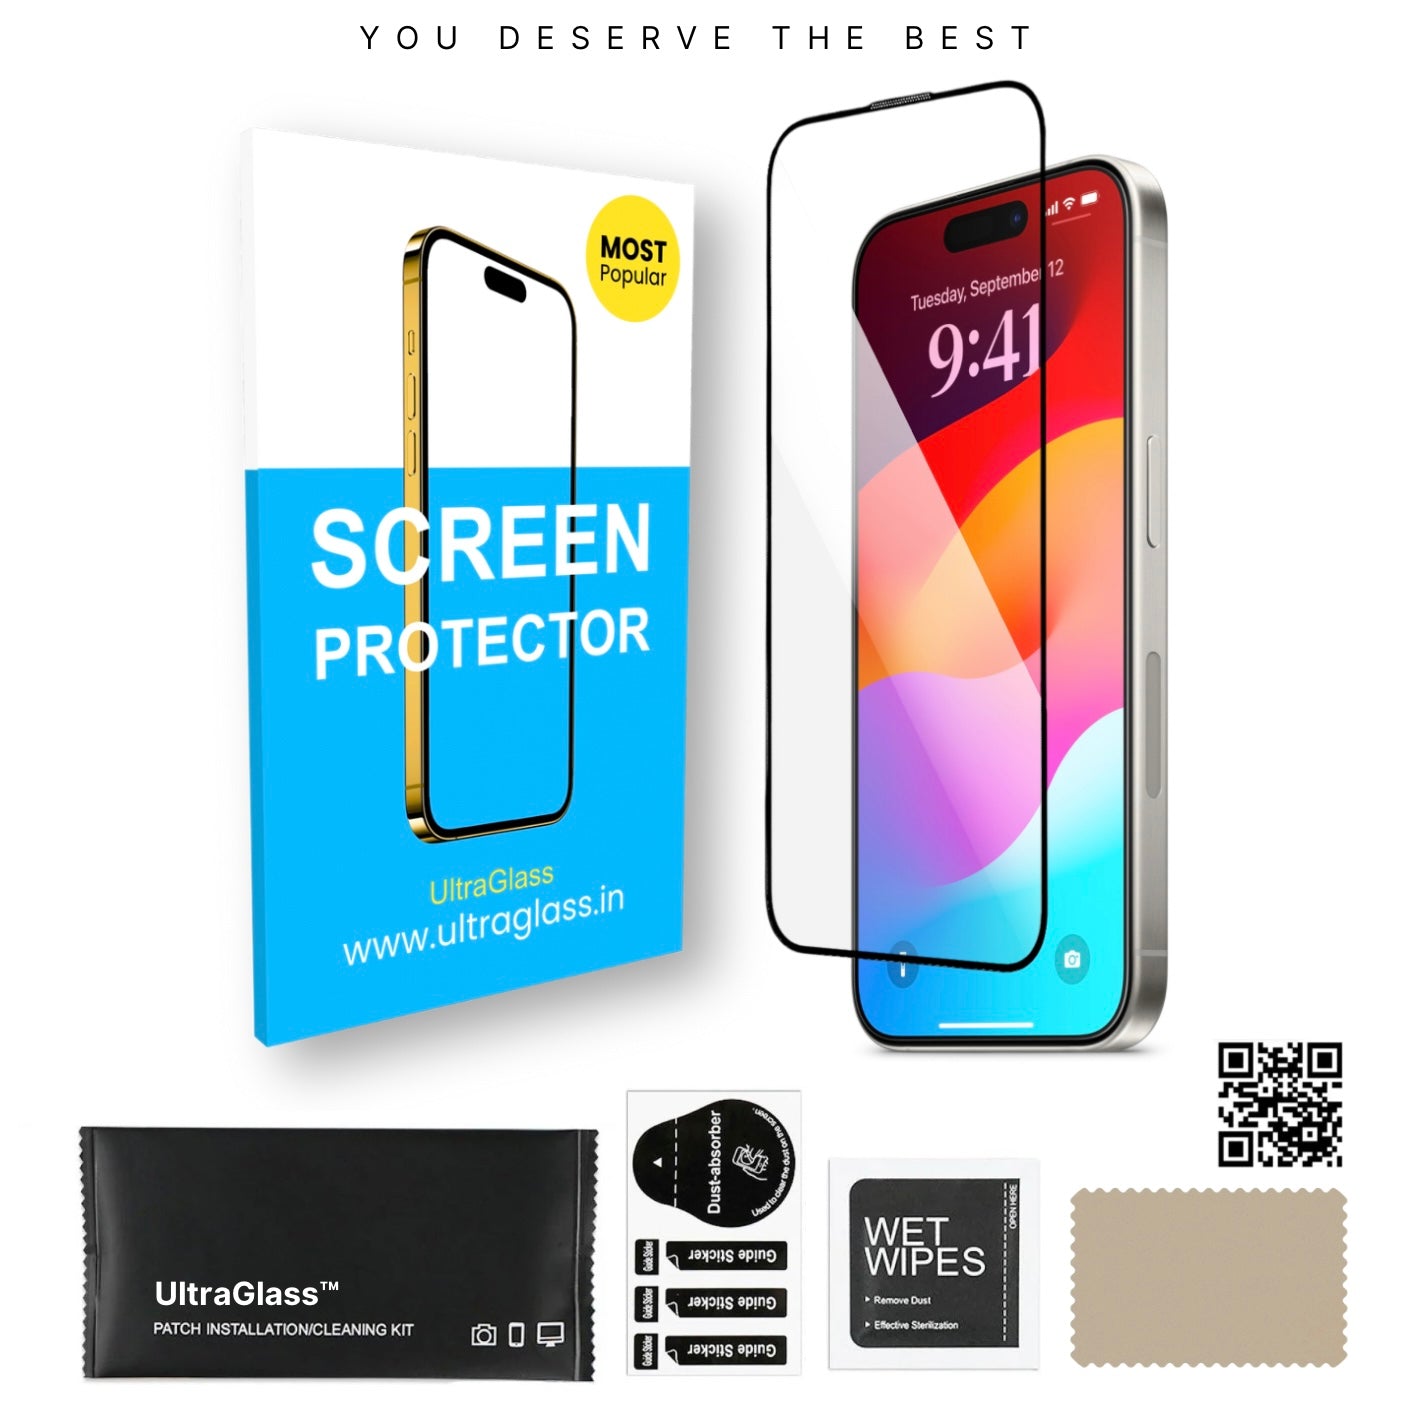 UltraGlass Screen Protector for iPhone